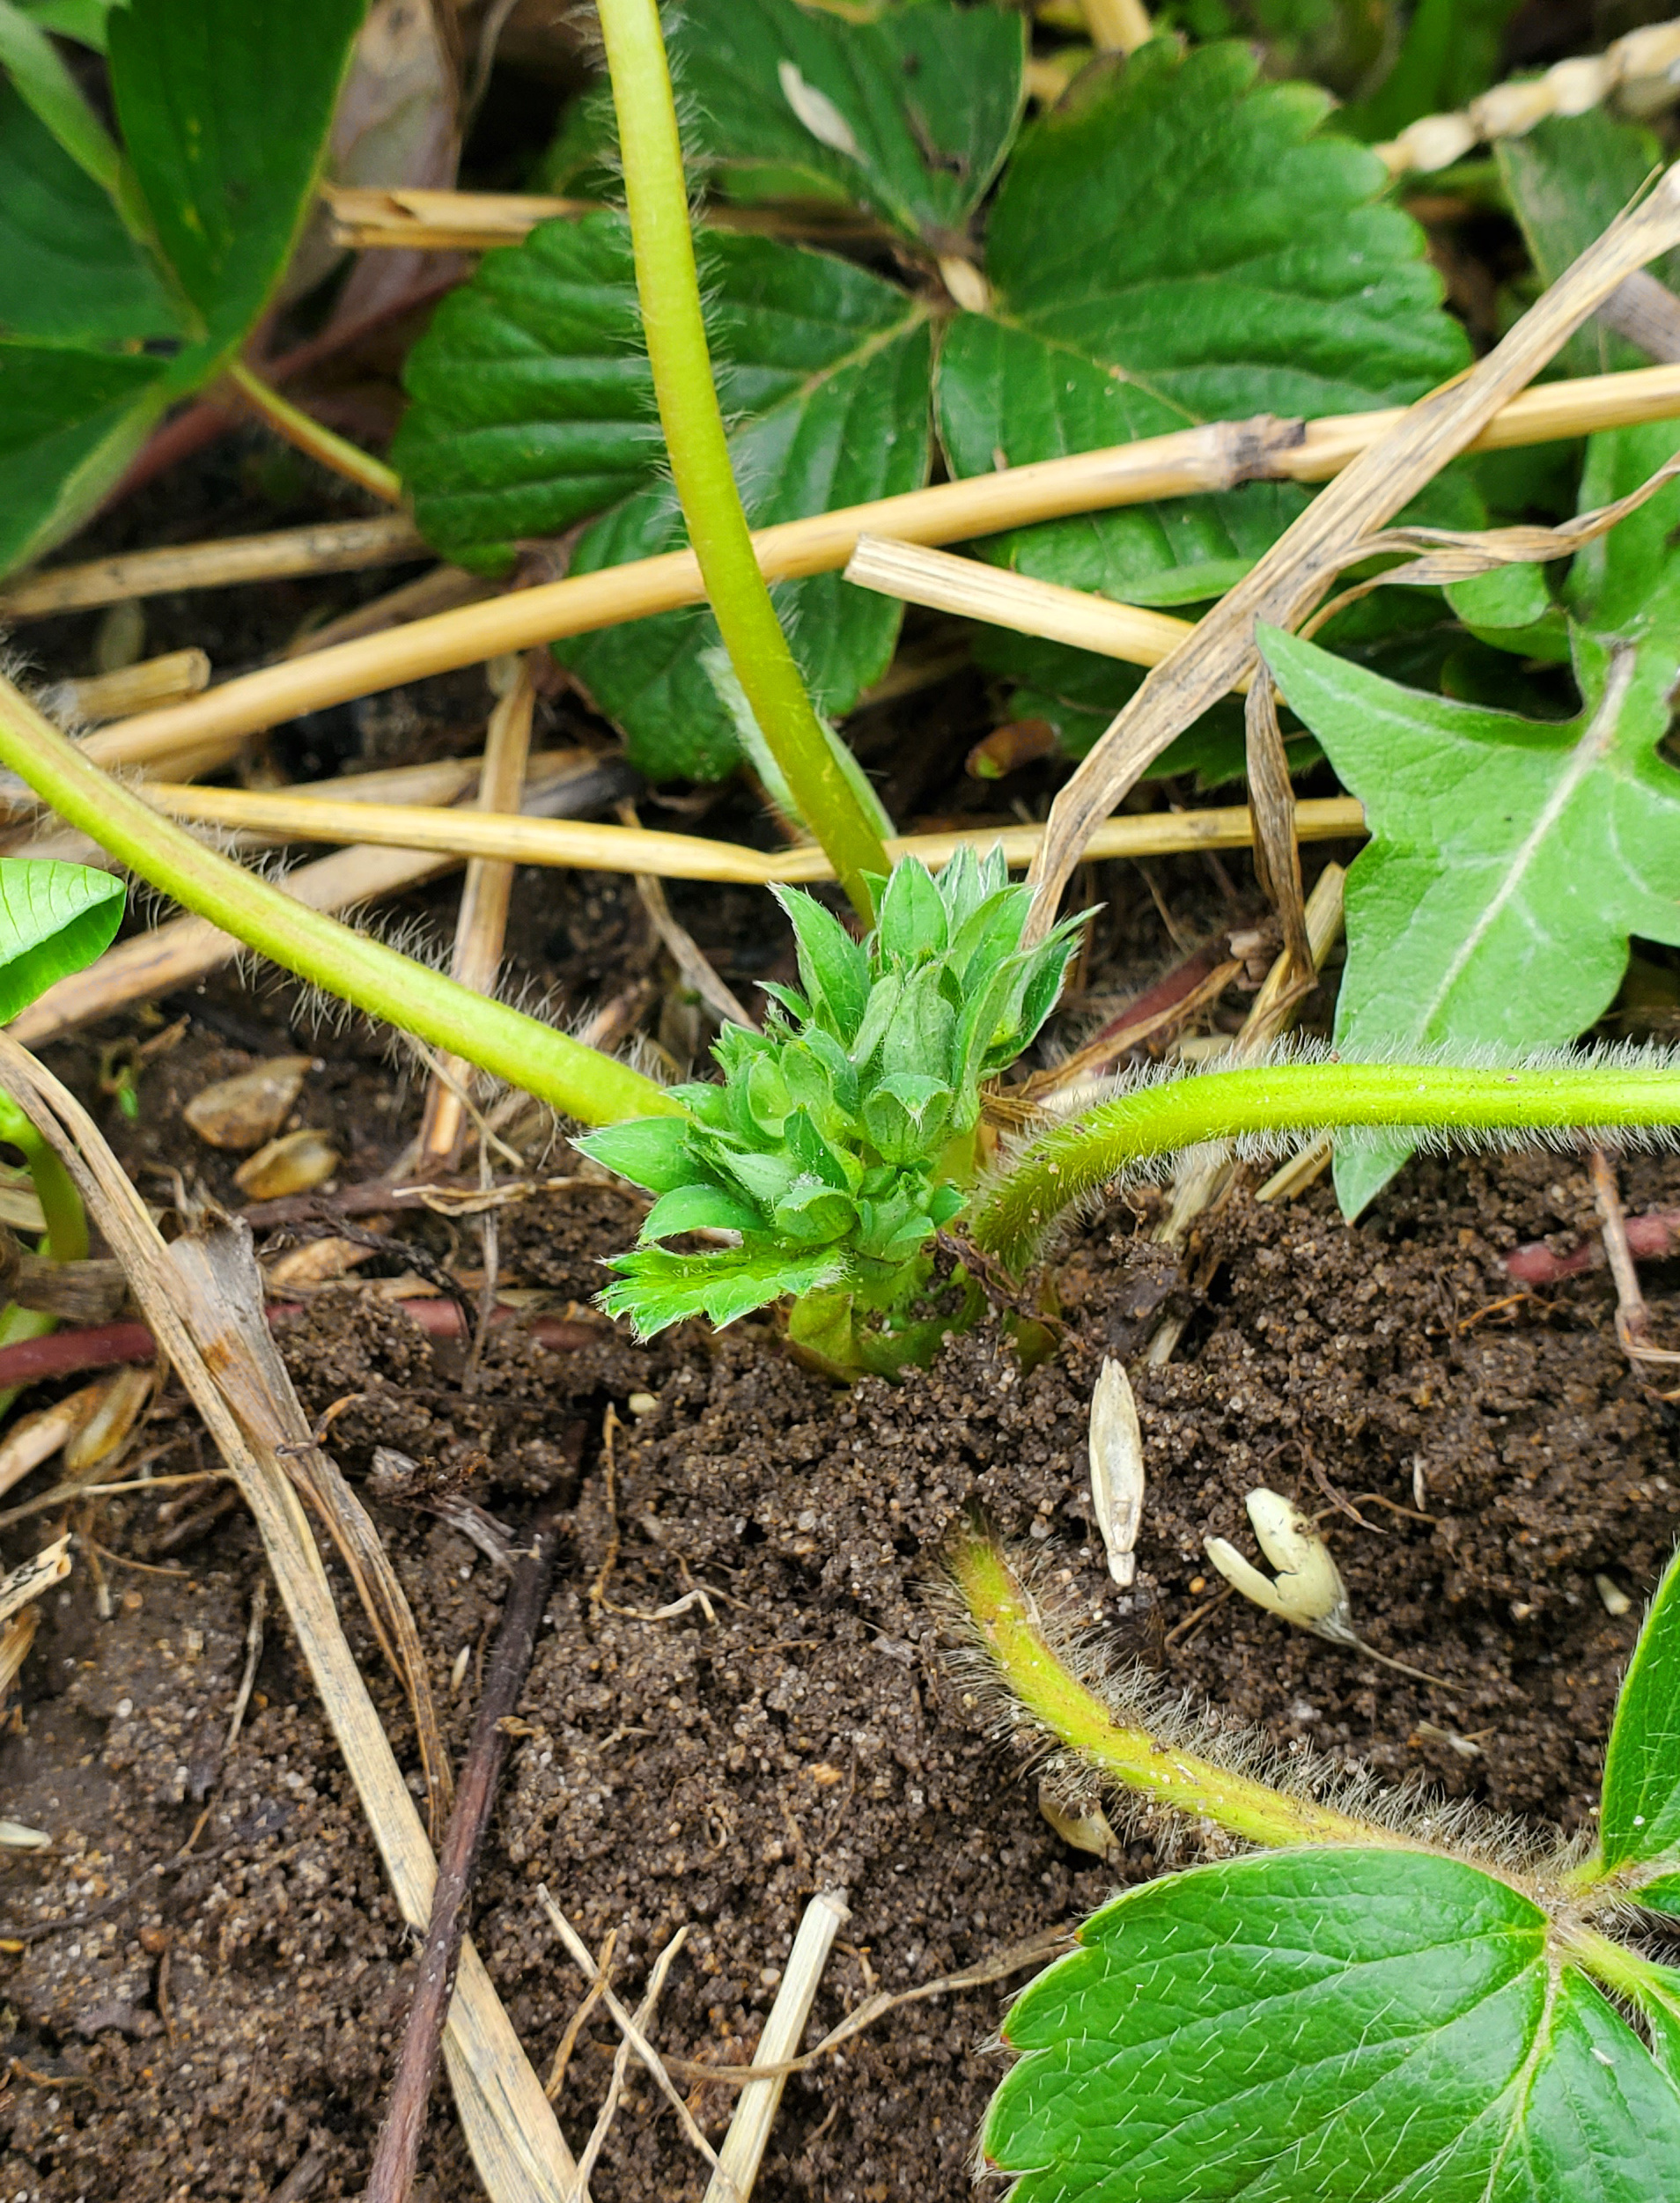 Strawberries coming up from the ground.